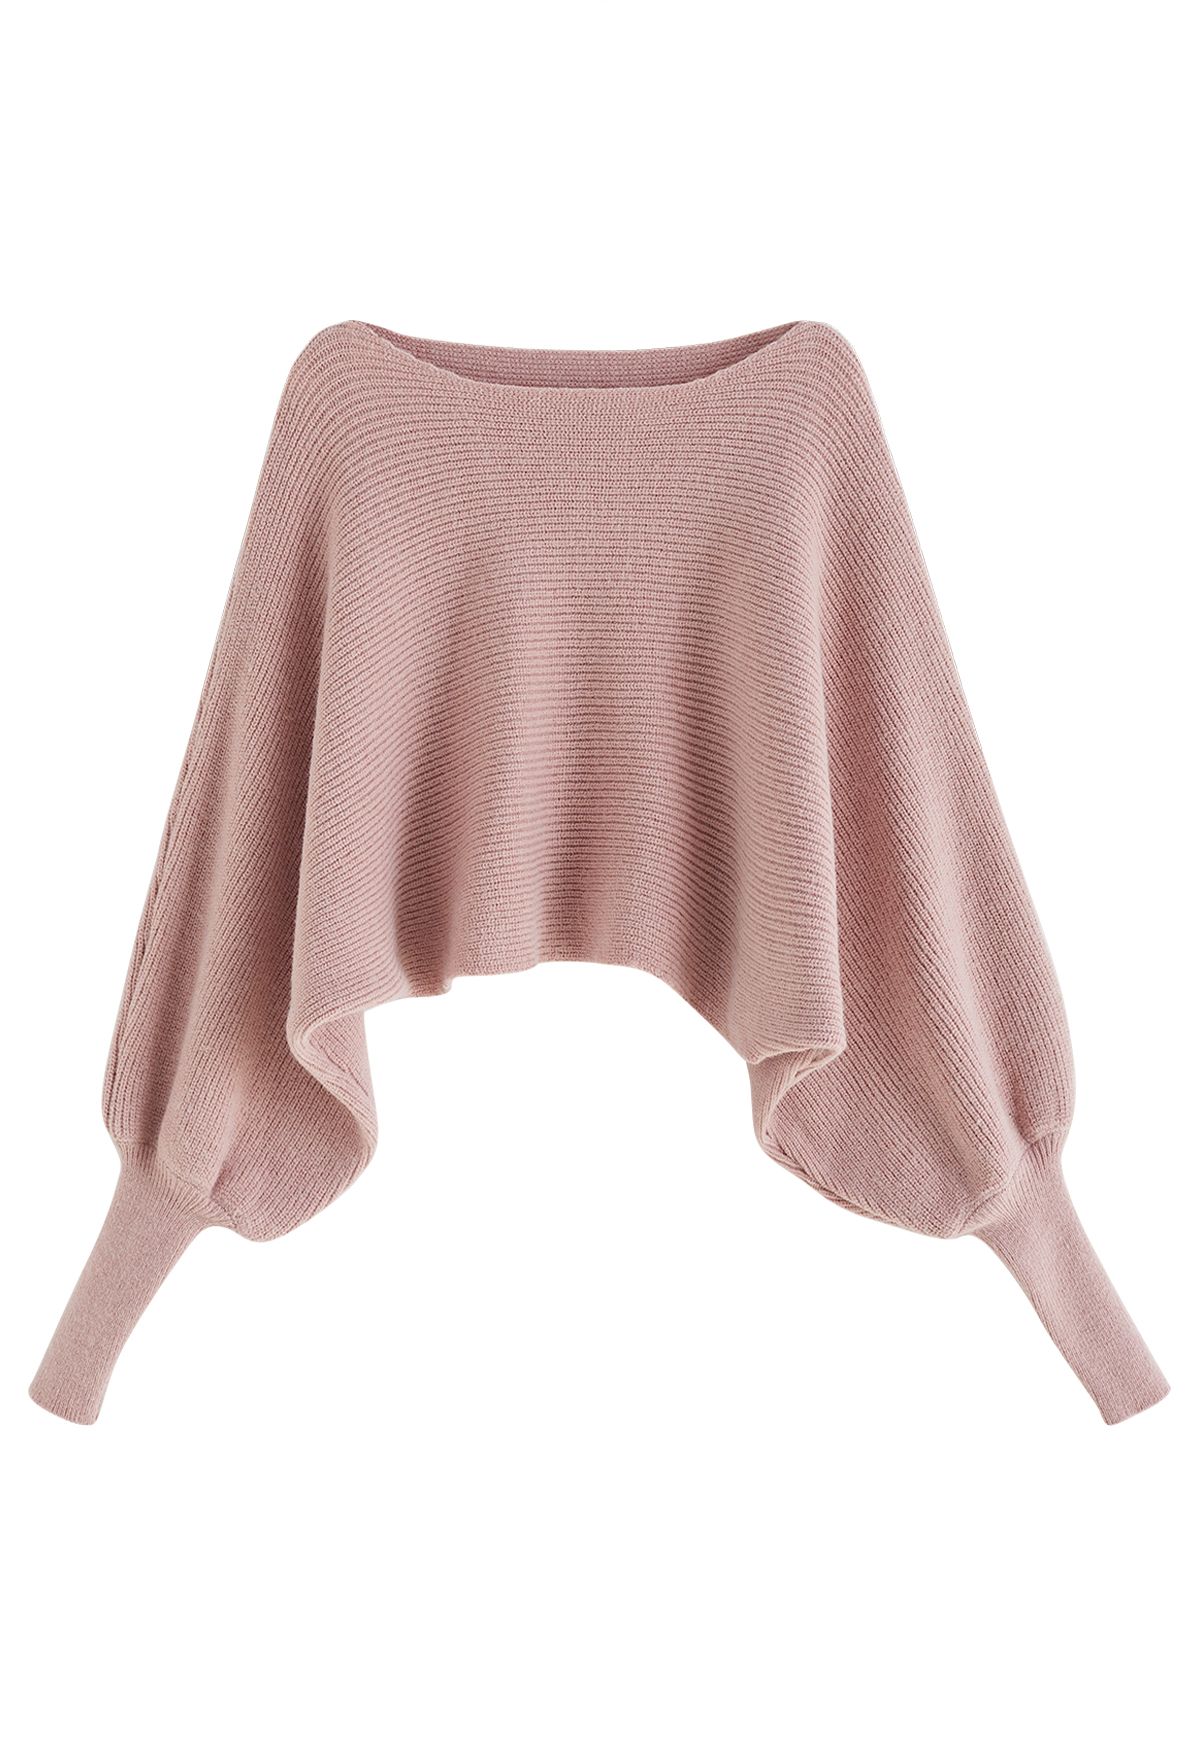 Exaggerated Bubble Sleeve Boat Neck Knit Top in Dusty Pink